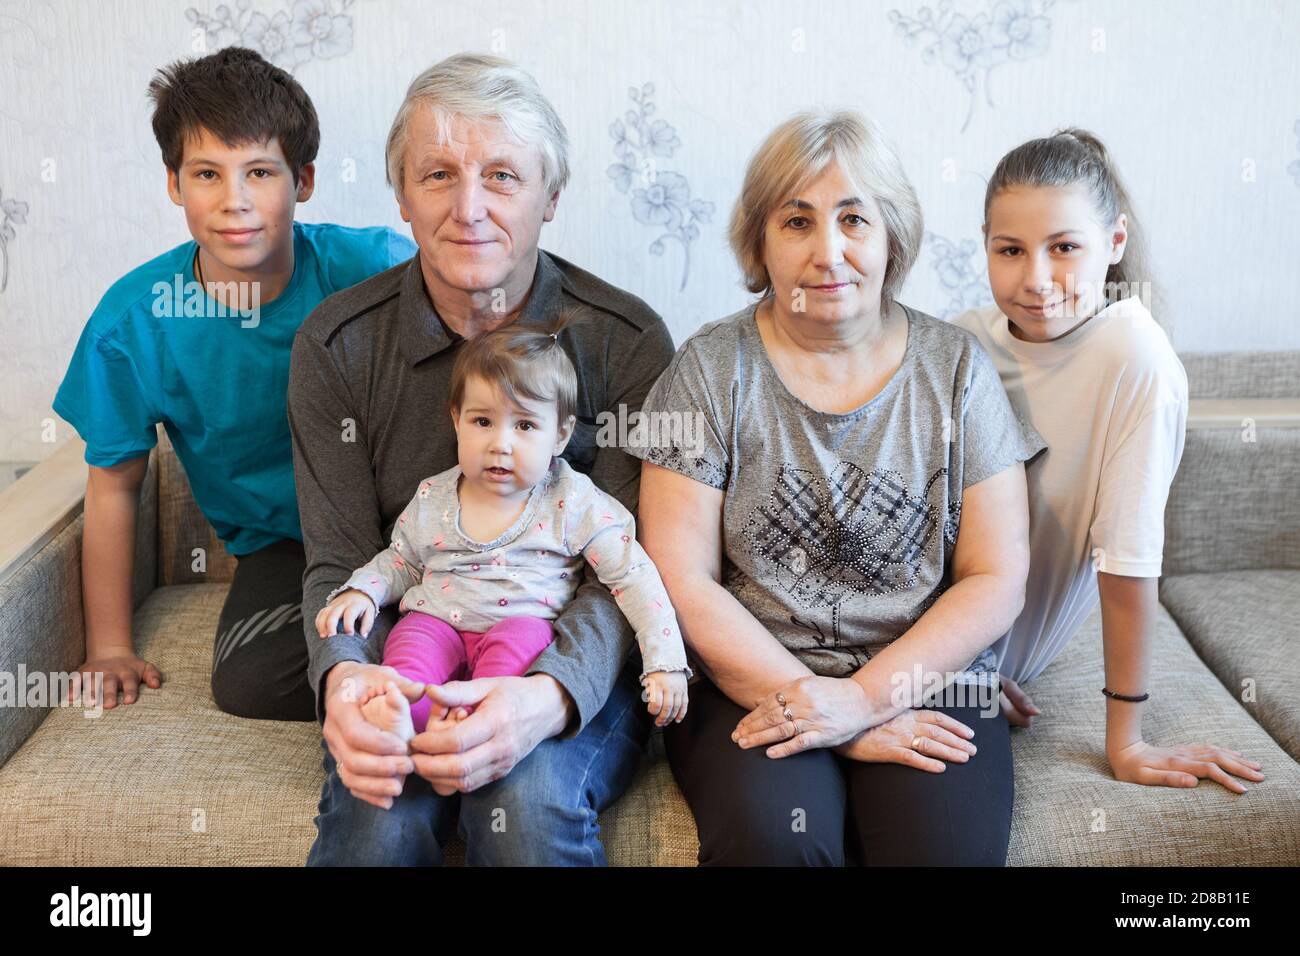 Caucasian family with teen age children, infant child and senior parents sitting on sofa at home. Happy and relaxing family portrait Stock Photo